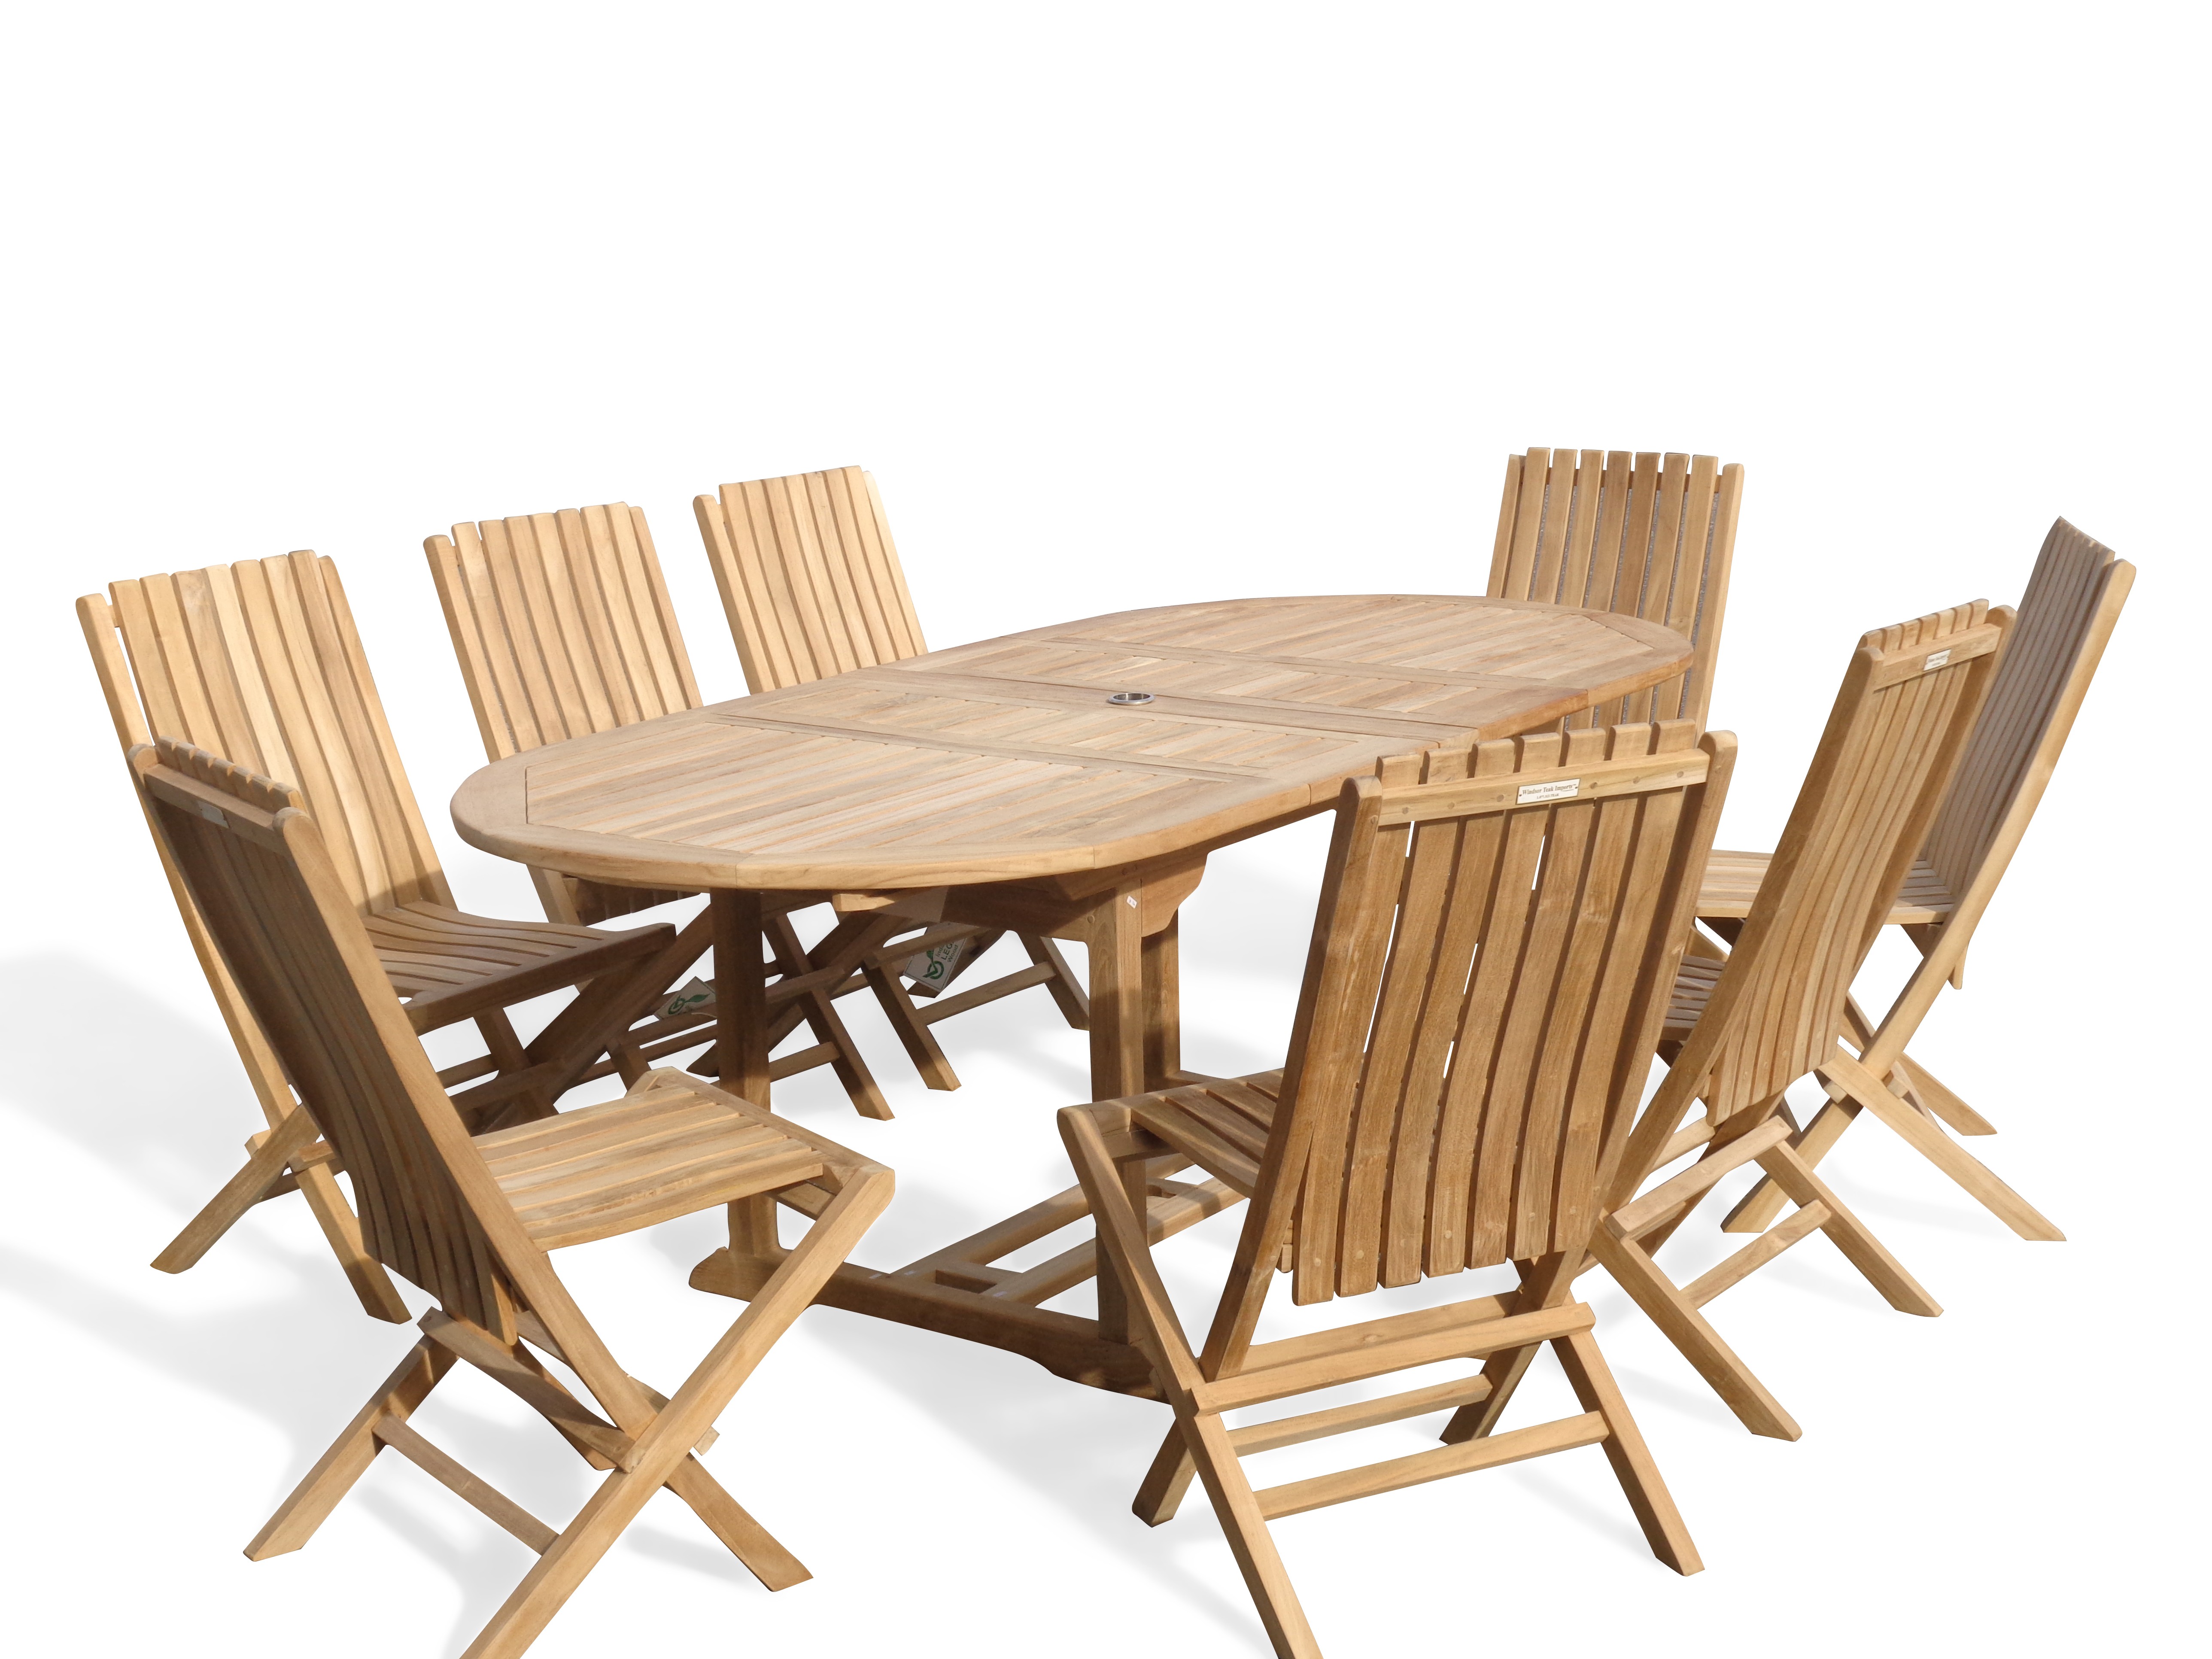 Buckingham 82" x 39" Double Leaf Oval Extension Teak Table W/8 Java Folding Chairs w/ Lumbar Support .